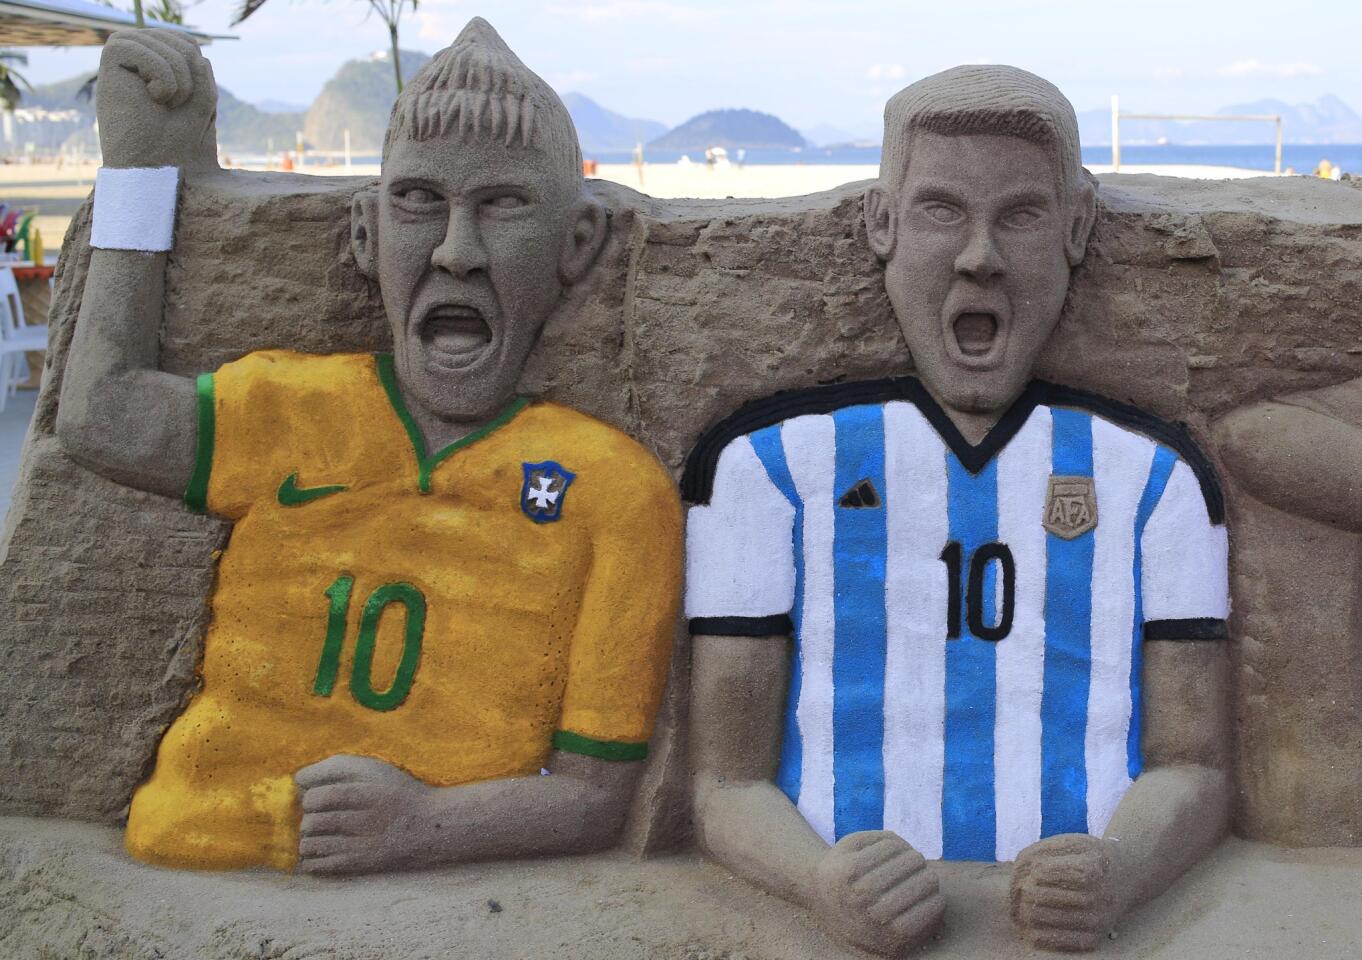 Soccer players Neymar da Silva Santos Jr., of Brazil, left, and Lionel Messi of Argentina are depicted in sand at Copacabana Beach in Rio de Janeiro.